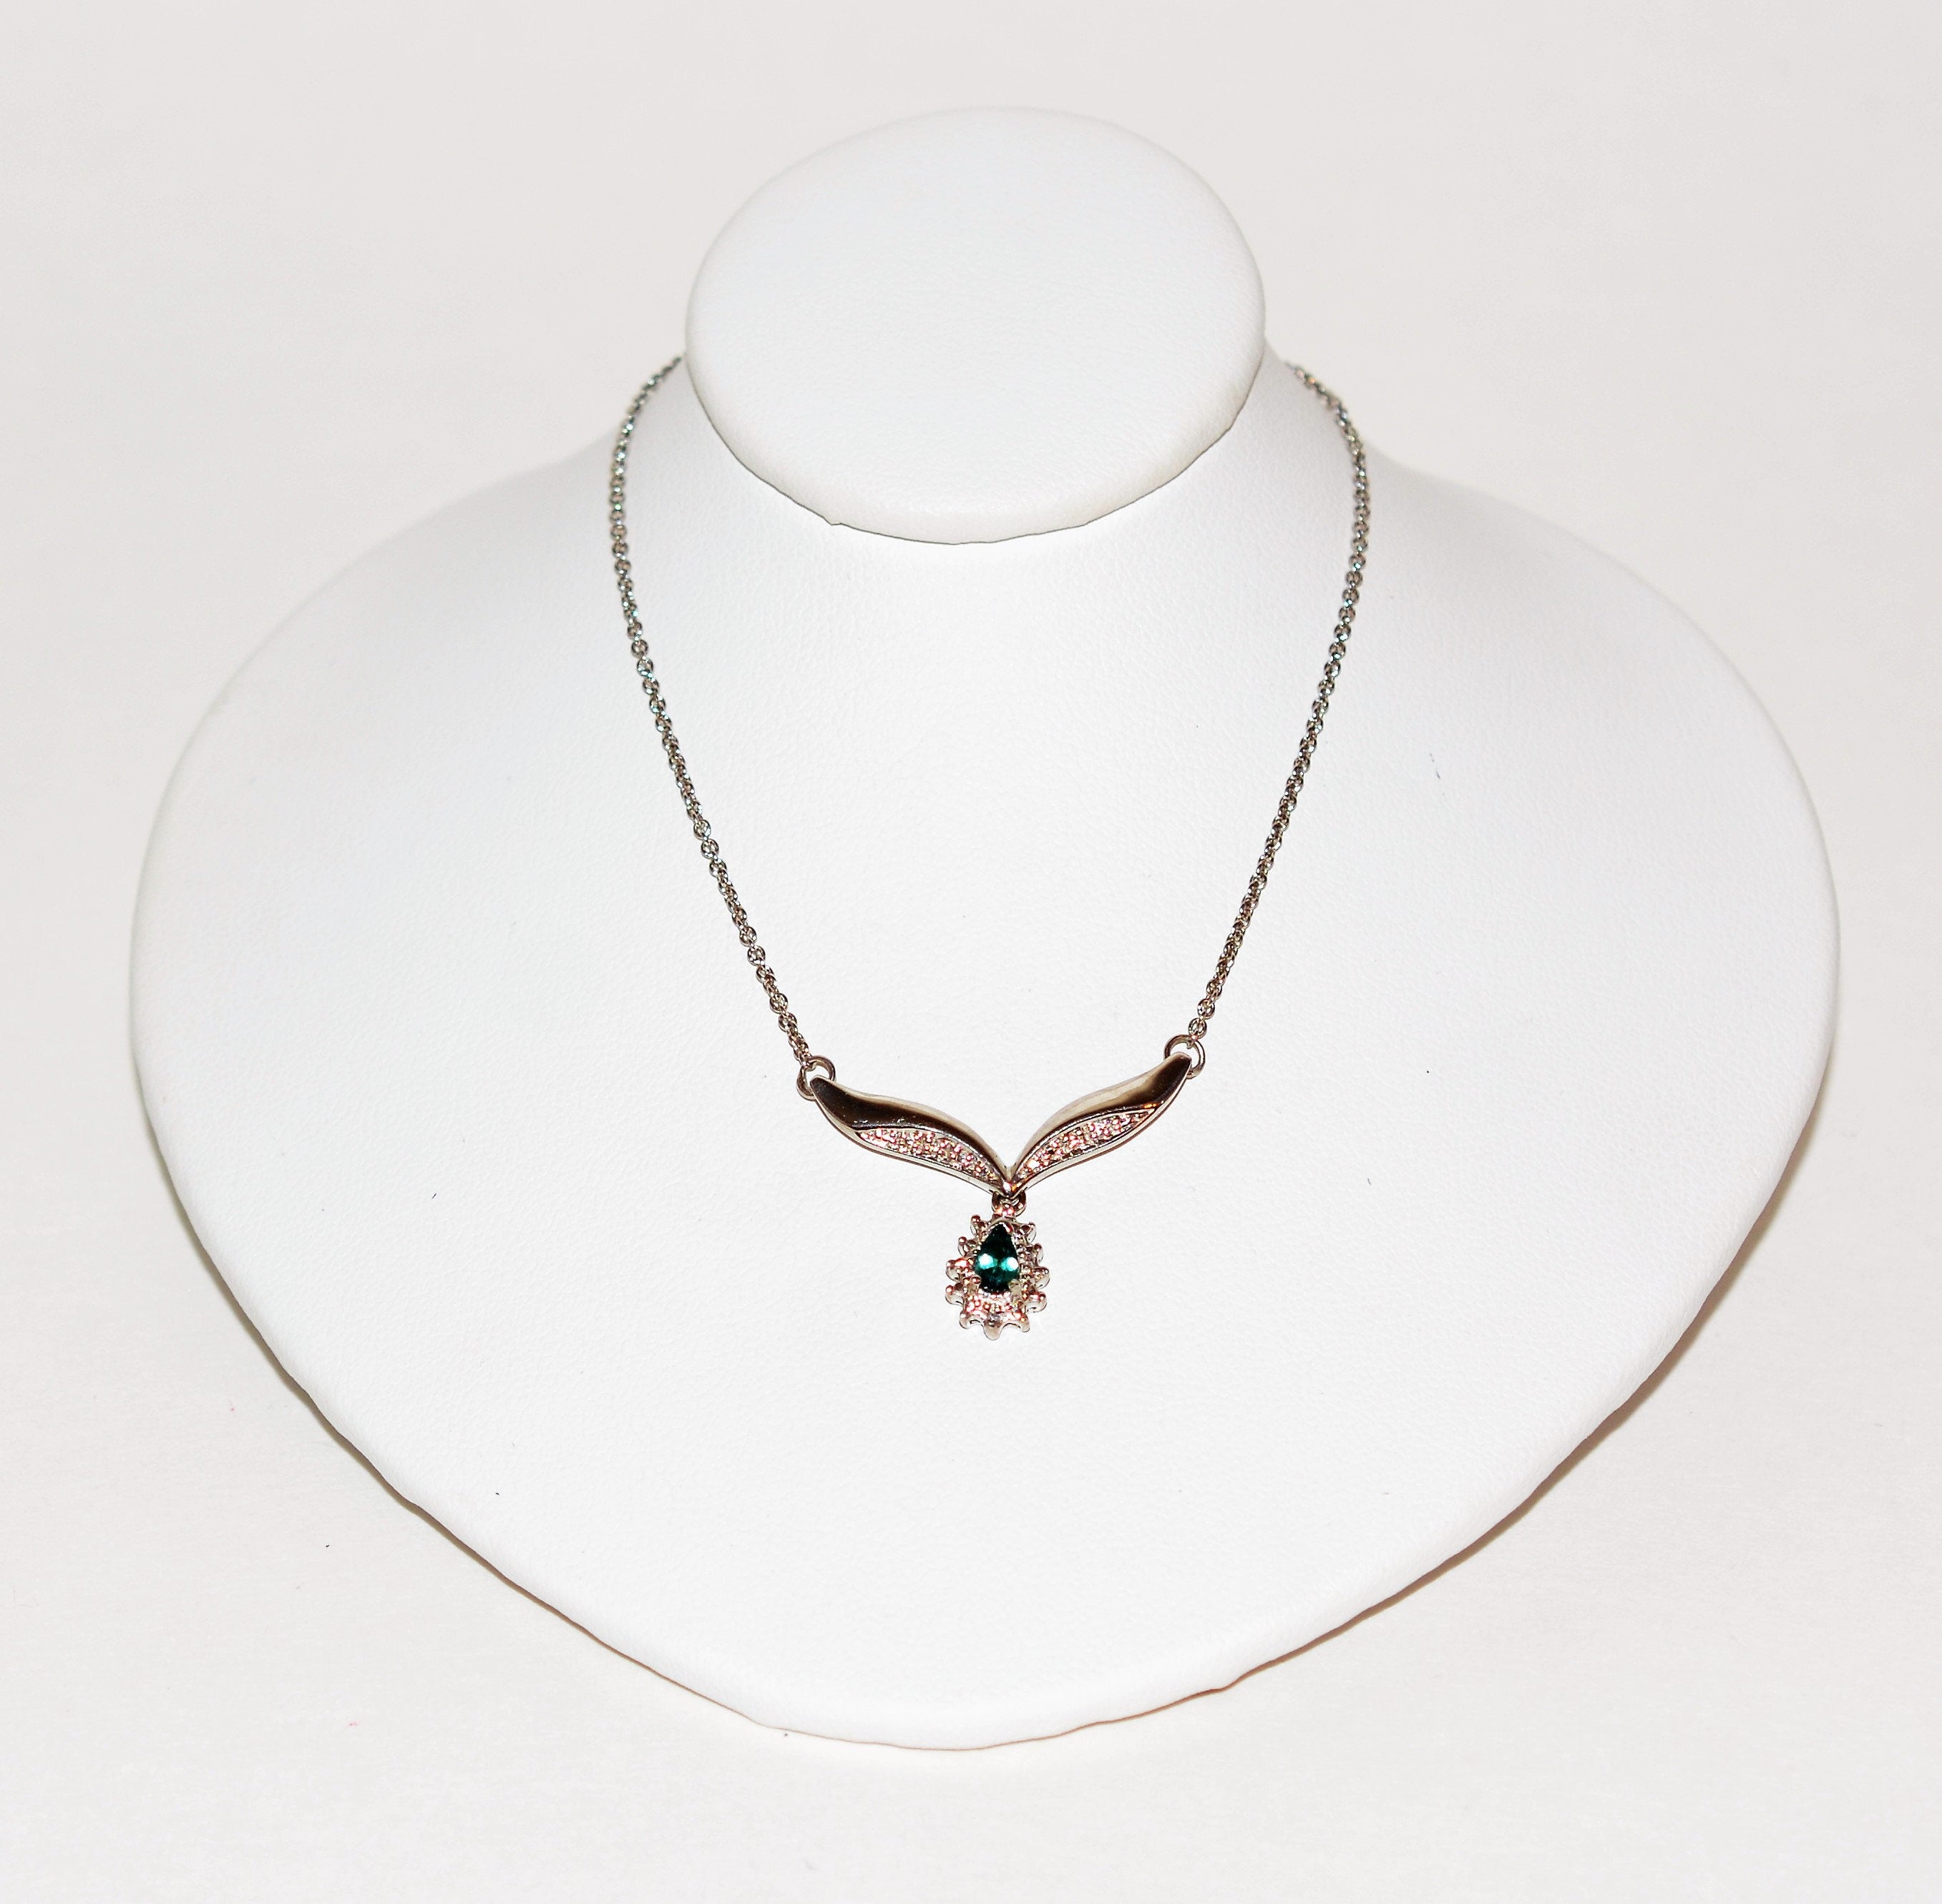 Natural Indicolite Tourmaline & Diamond Necklace 14K Solid White Gold .31tcw Statement Necklace Pendant Necklace Tourmaline Necklace Estate